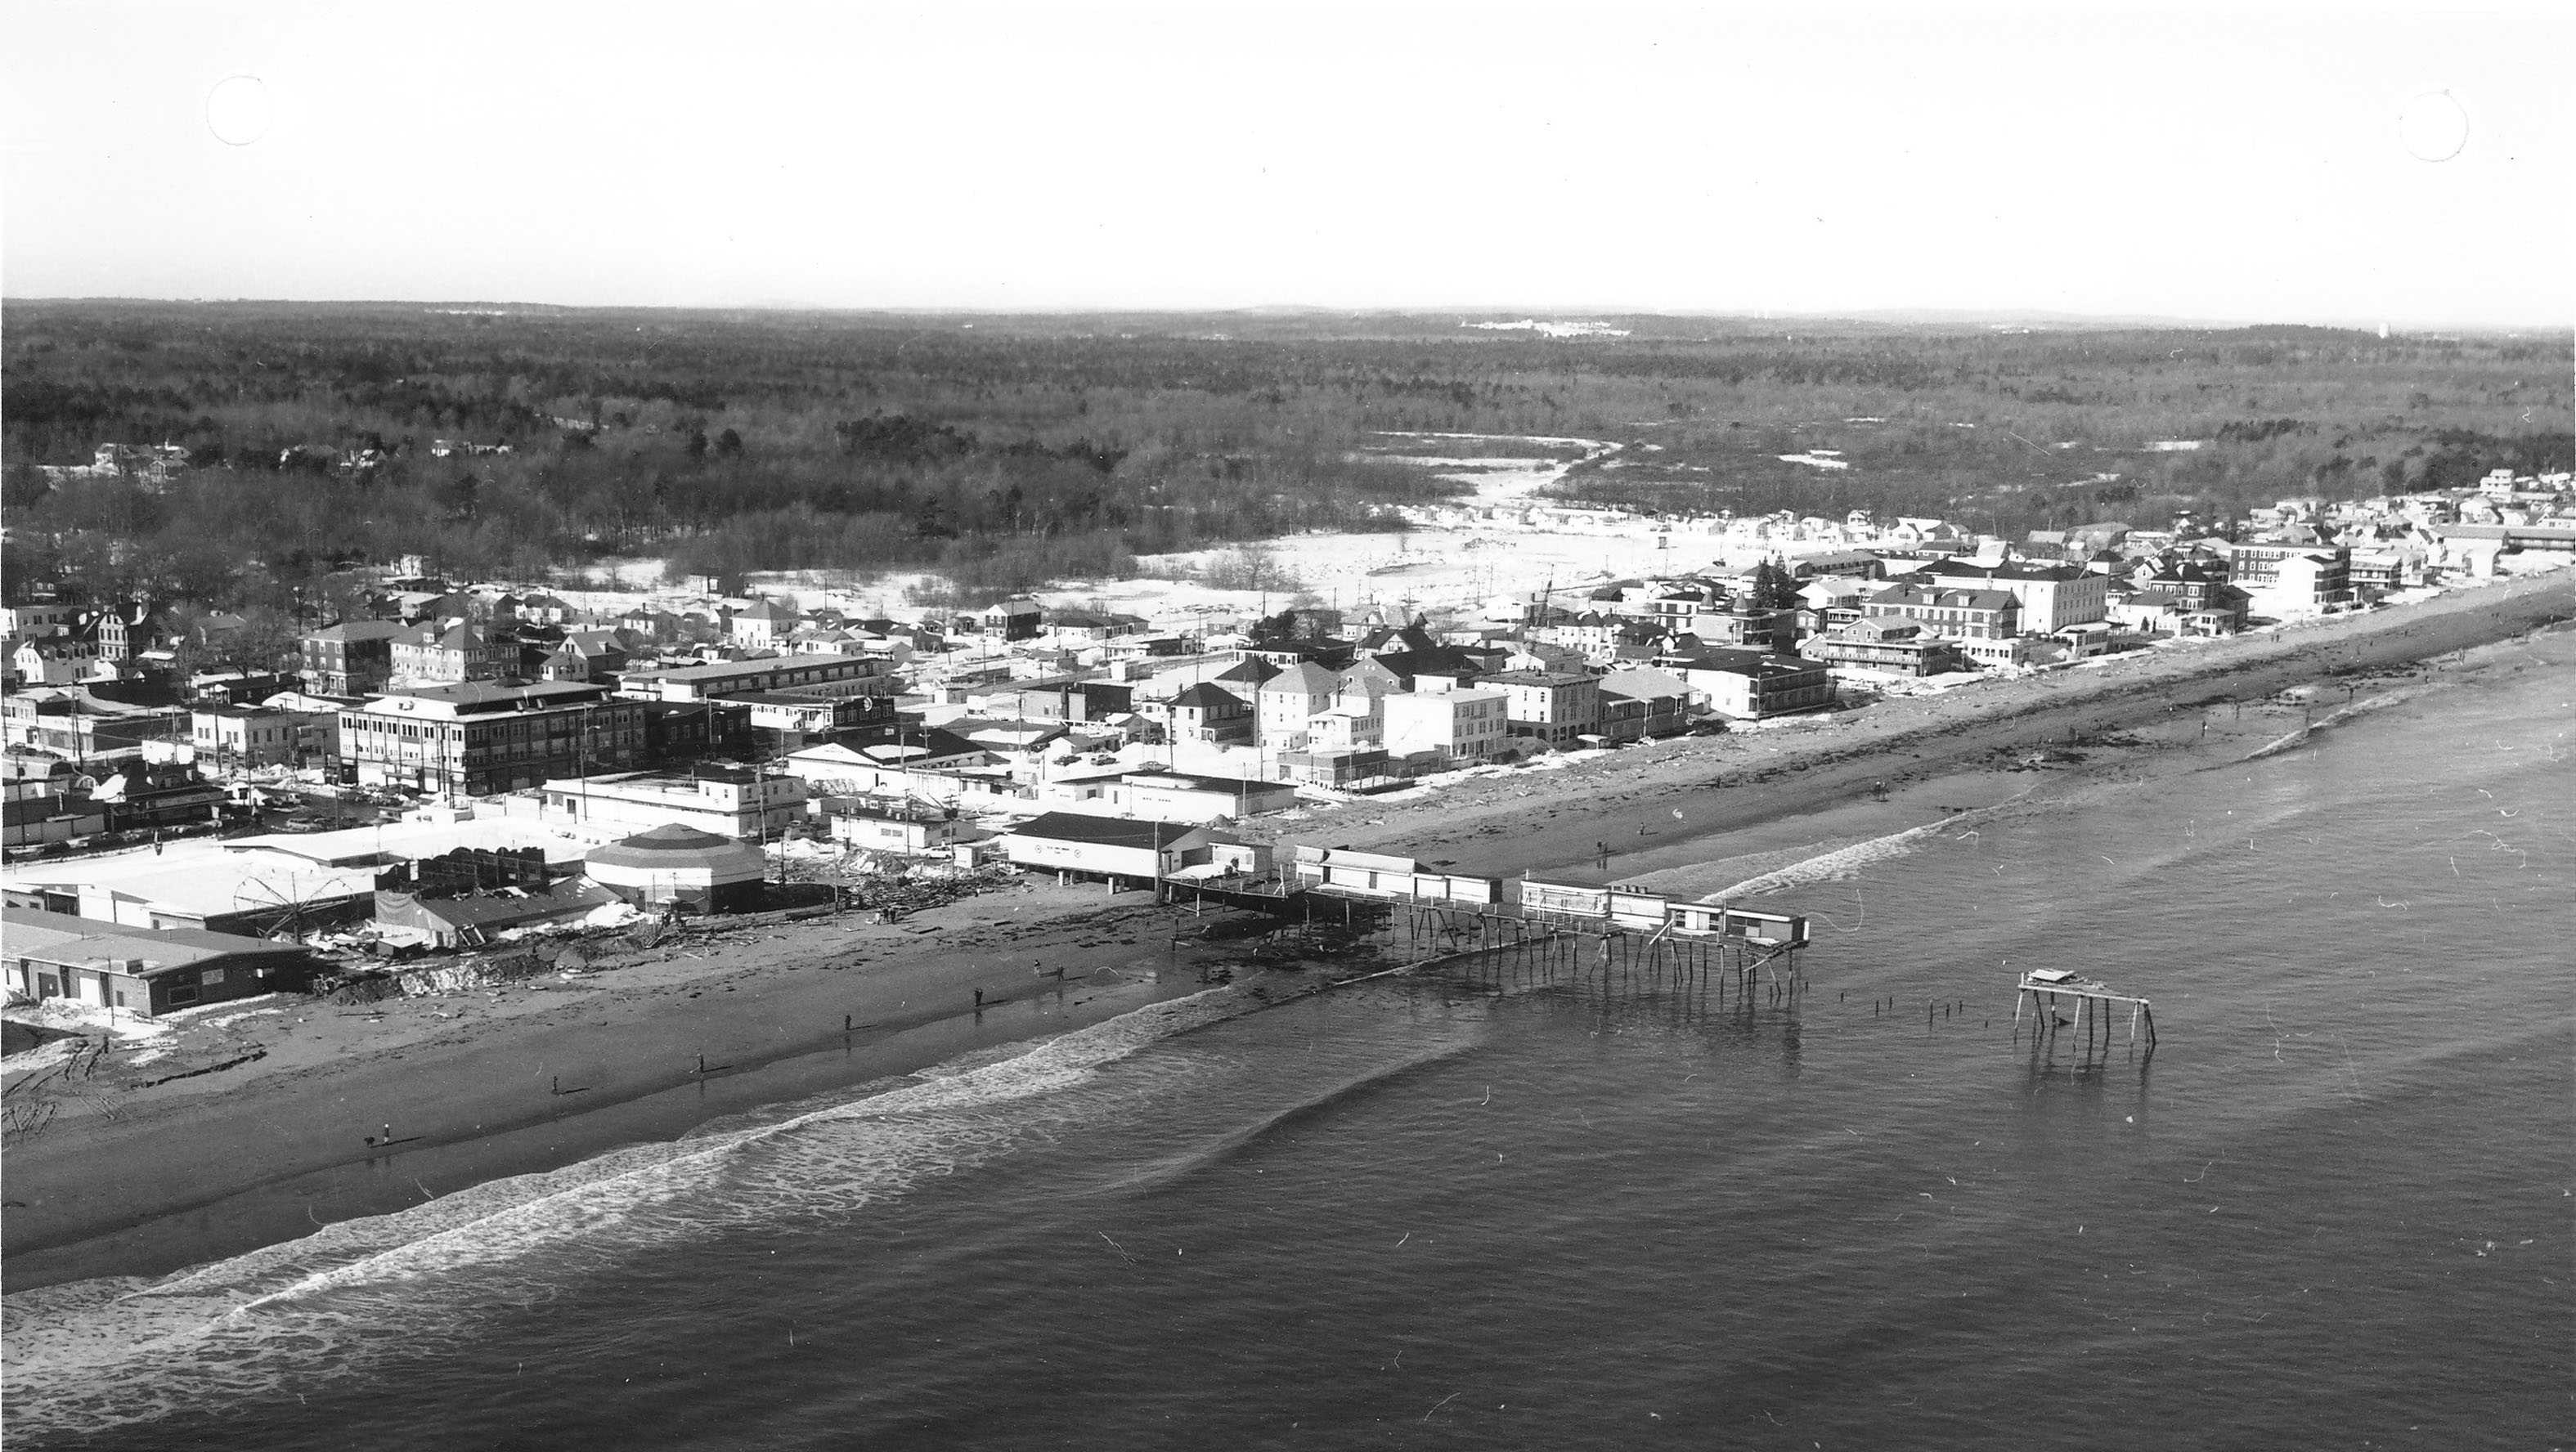 A View Of The Old Orchard Beach Pier After the Great Storm, Maine